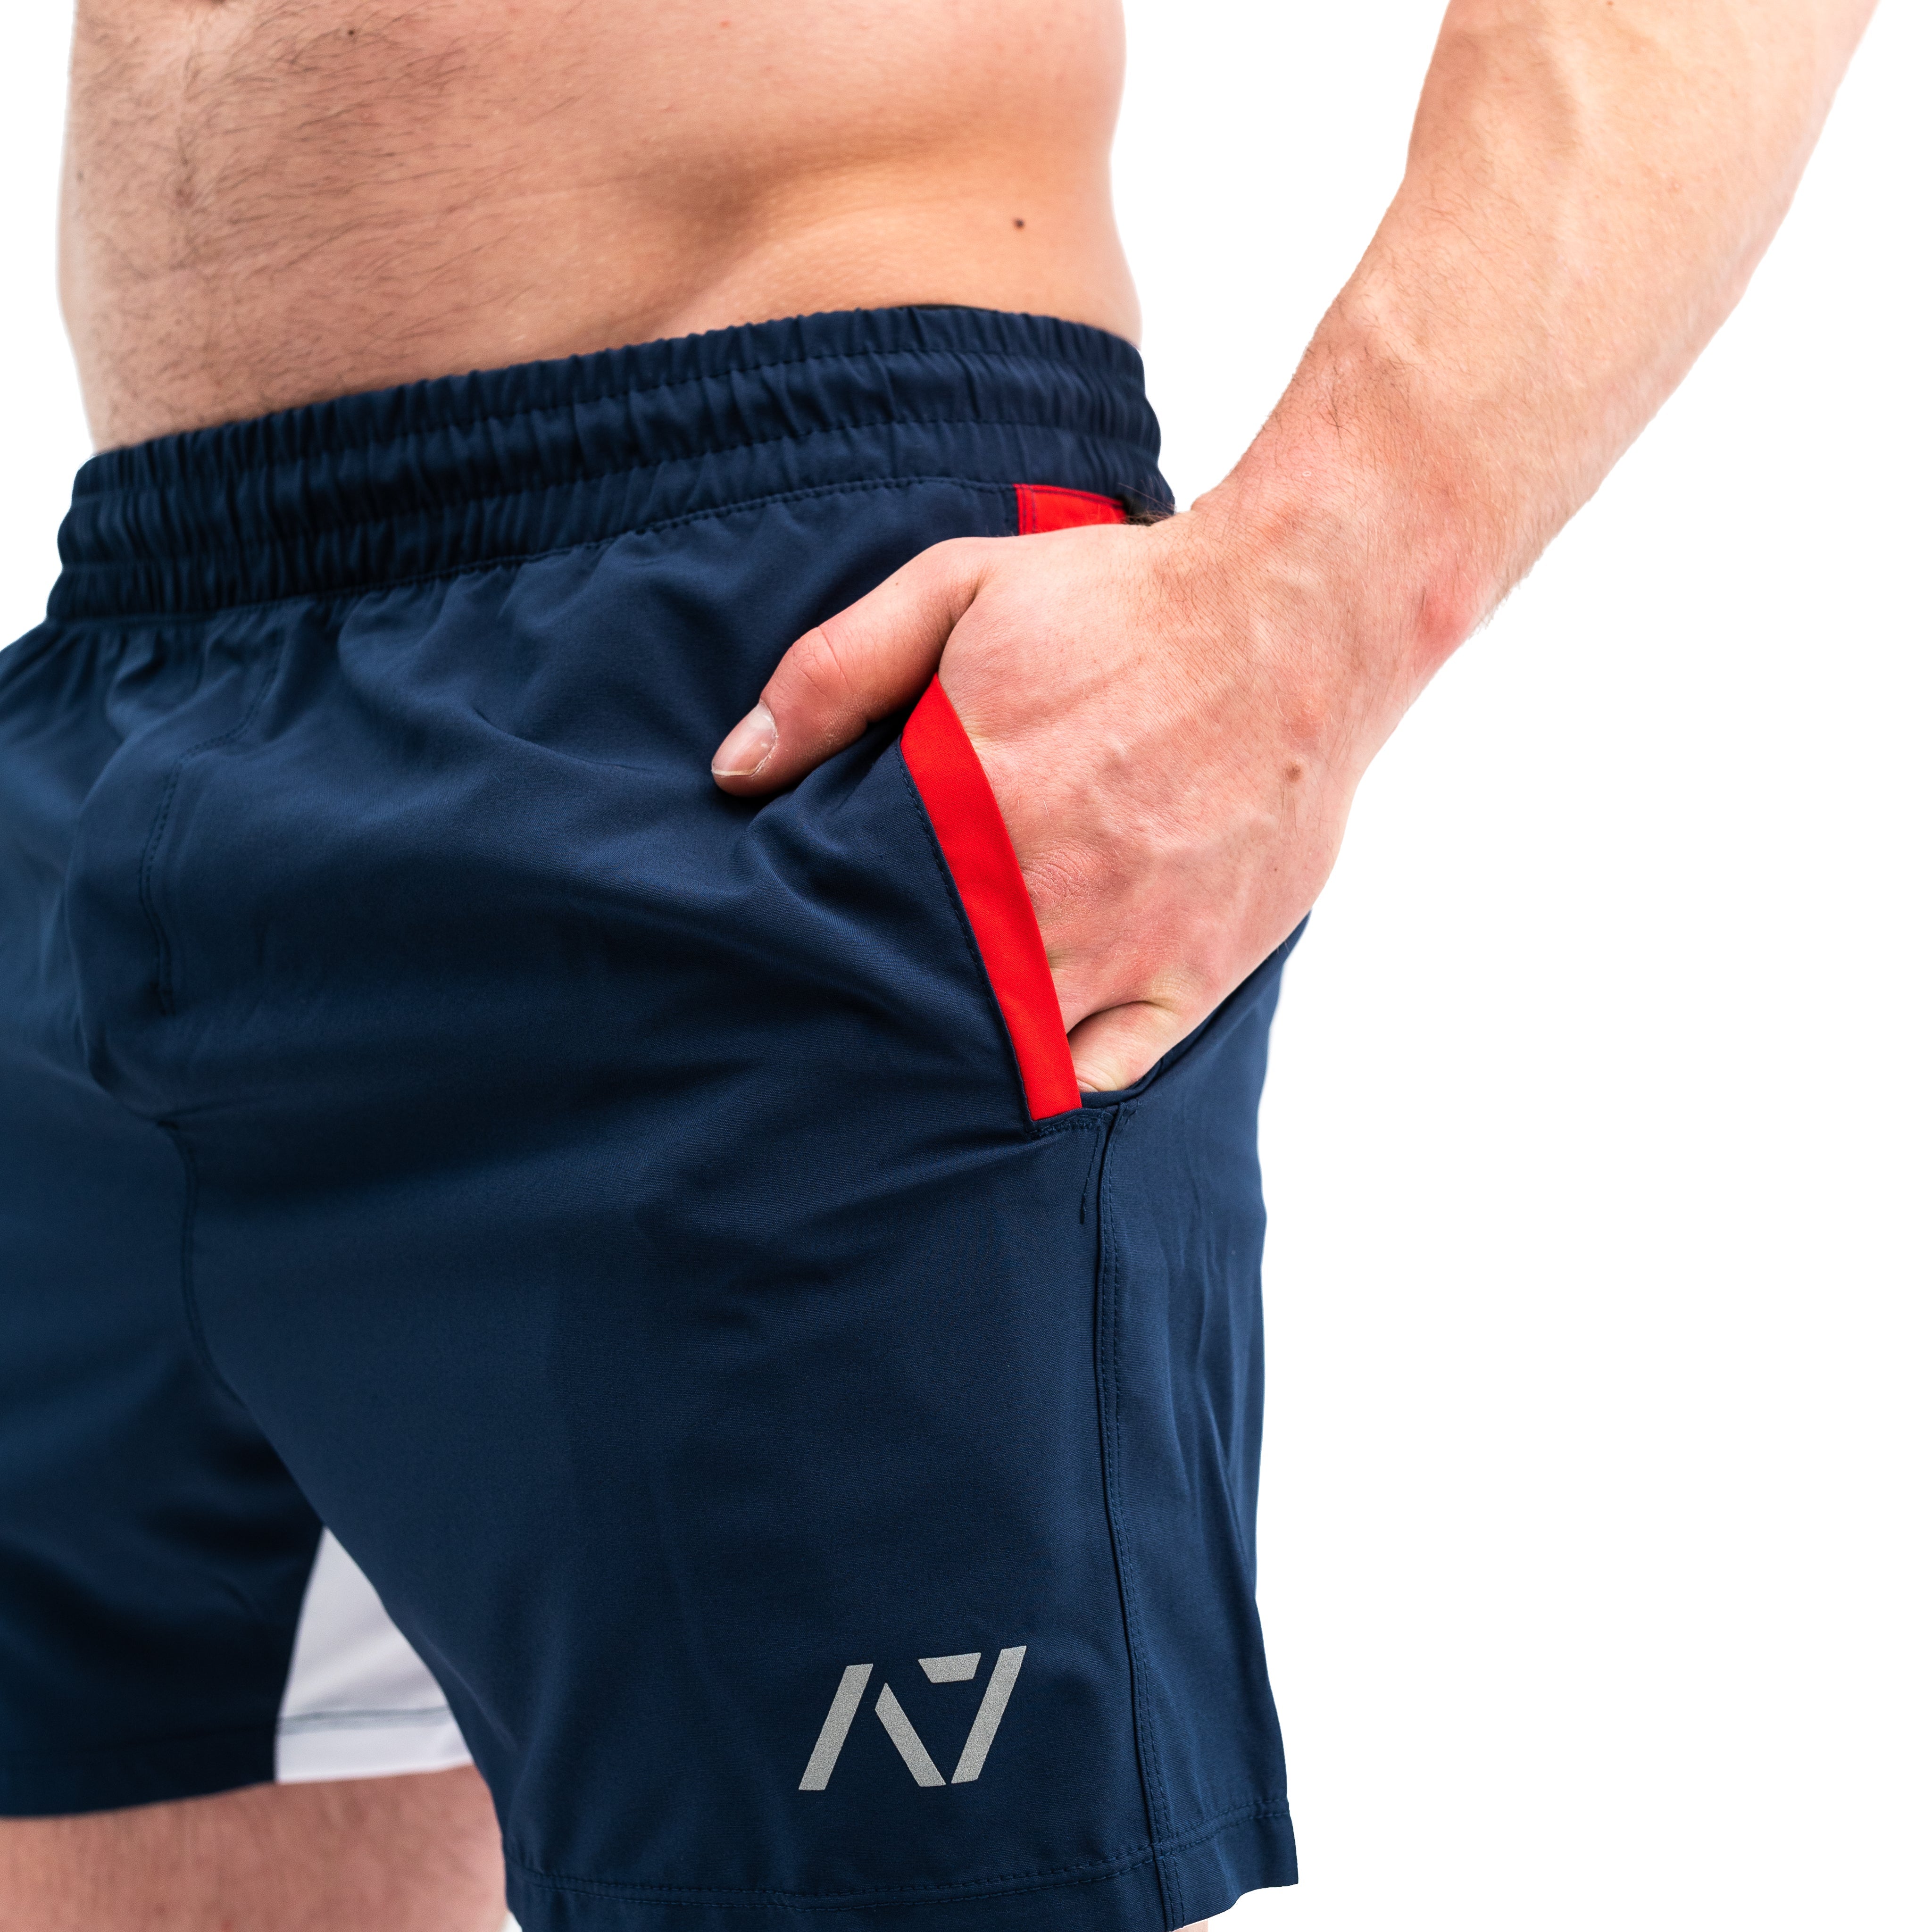 Have you ever squatted in shorts and realised that they may be too tight on you at the bottom of a squat? The shorts are made with stretchy fabric in between legs so you are never constricted during your squat. KWD shorts have a shorter inseam and are designed to show off your quads (KWaDs). Available in UK and Europe including France, Italy, Germany, Sweden and Poland.